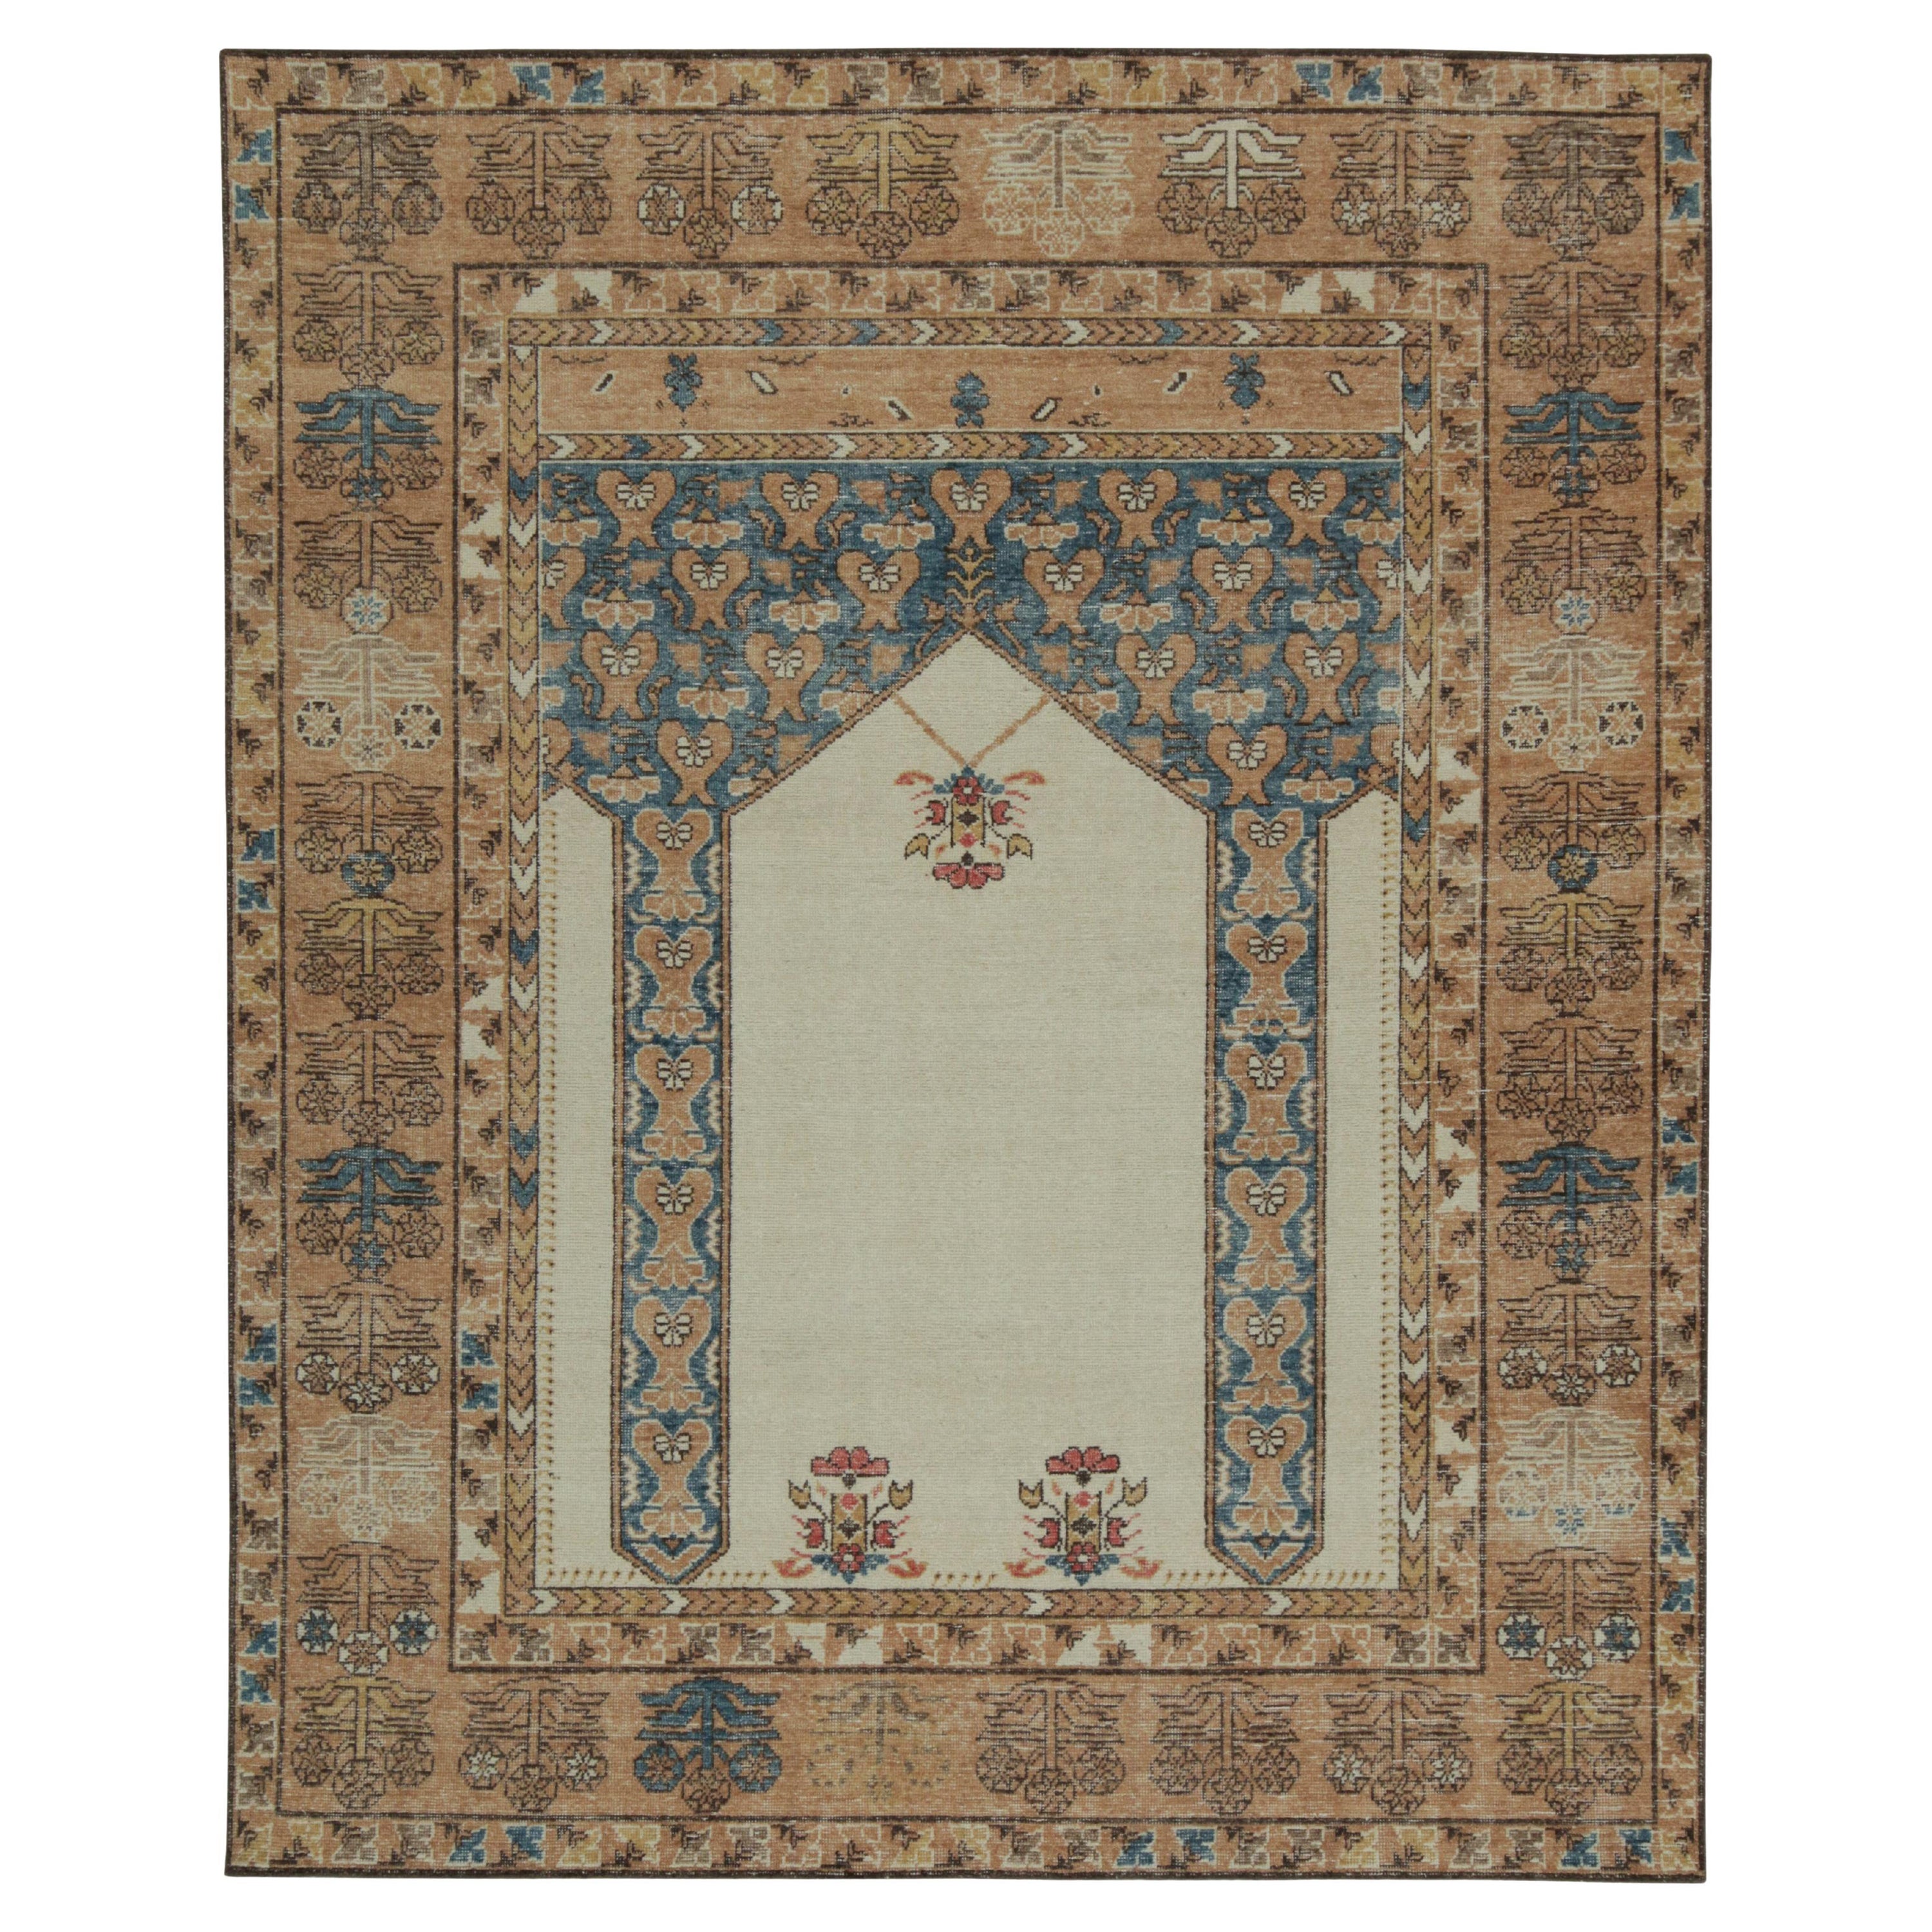 Rug & Kilim's Distressed Style rug with Mihrab Pattern and Beige Open Field (tapis de style vieilli avec motif Mihrab et champ ouvert beige)